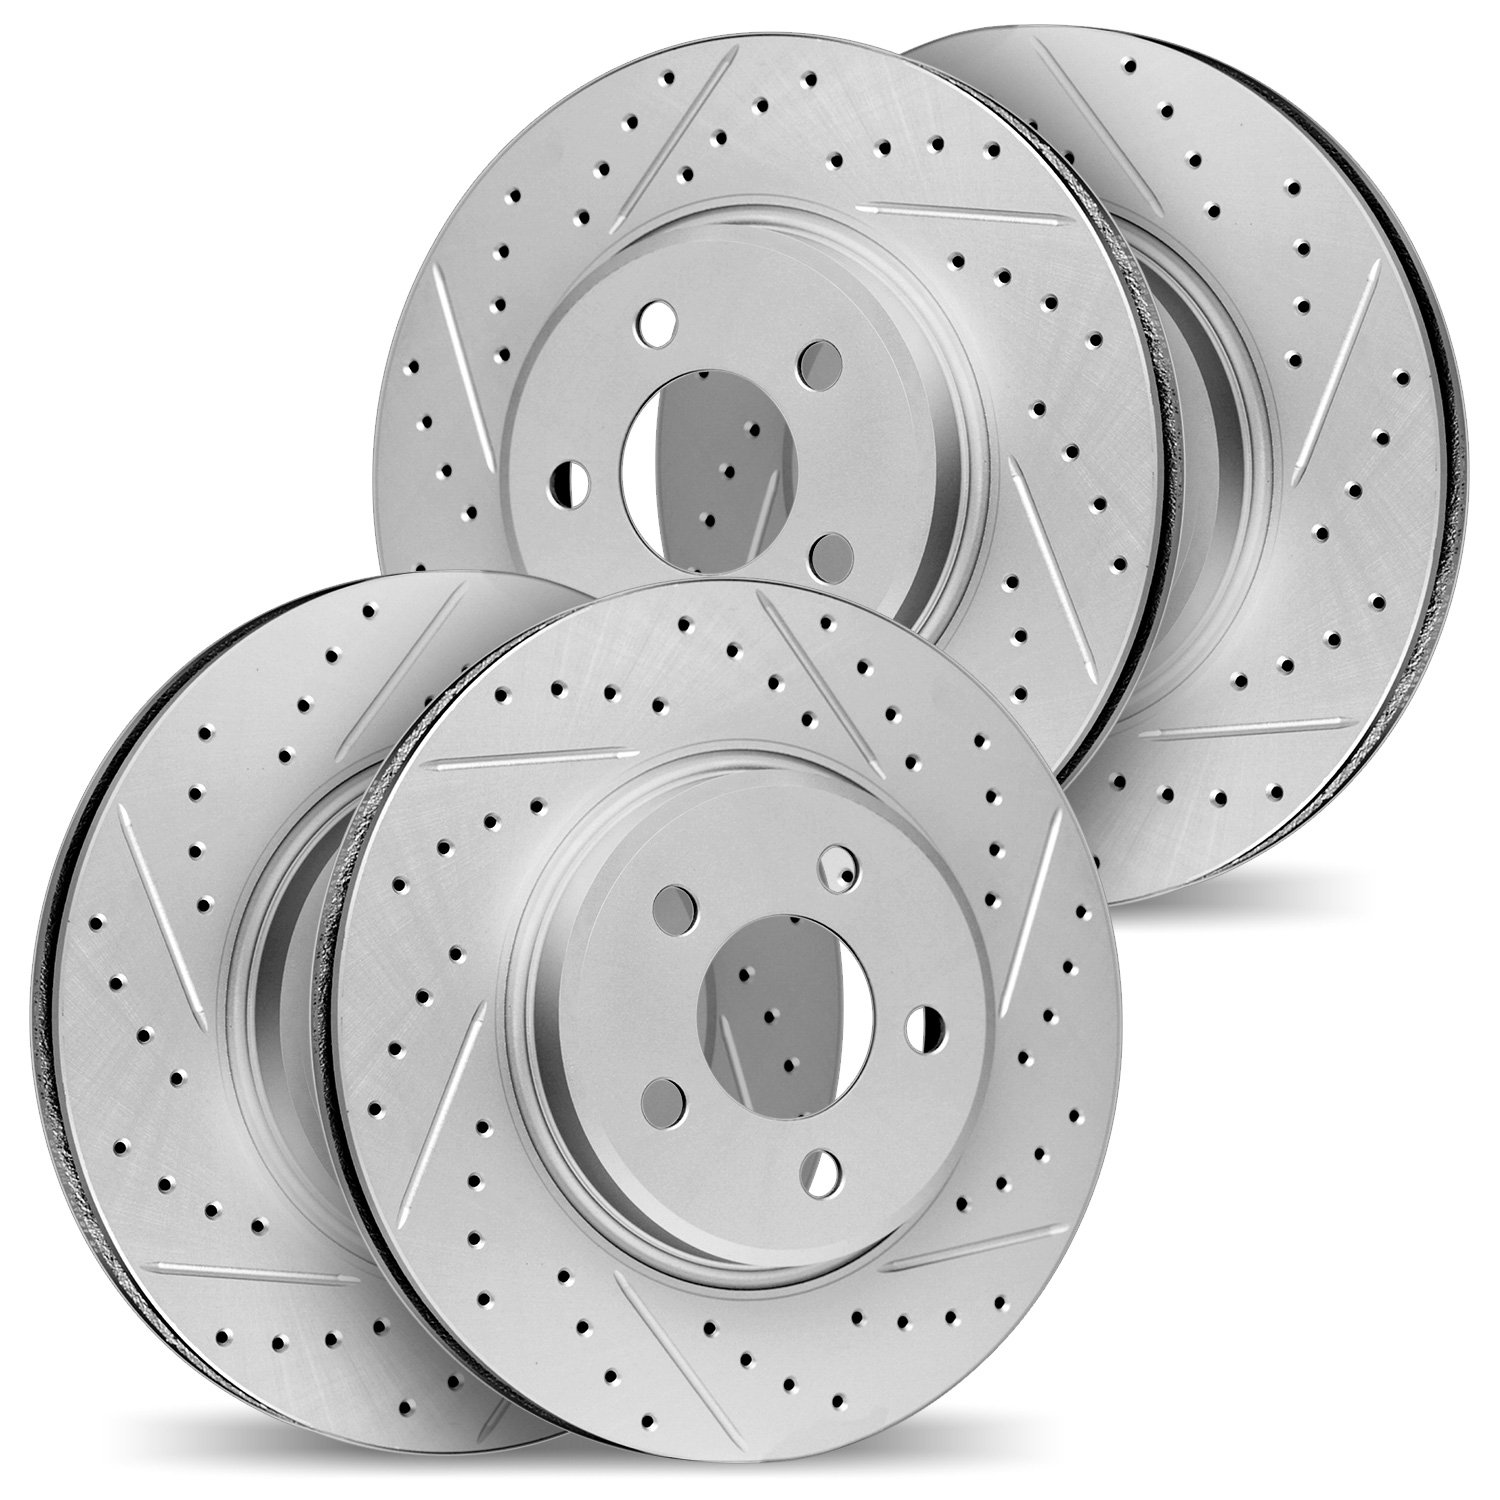 2004-67011 Geoperformance Drilled/Slotted Brake Rotors, 2002-2006 Infiniti/Nissan, Position: Front and Rear